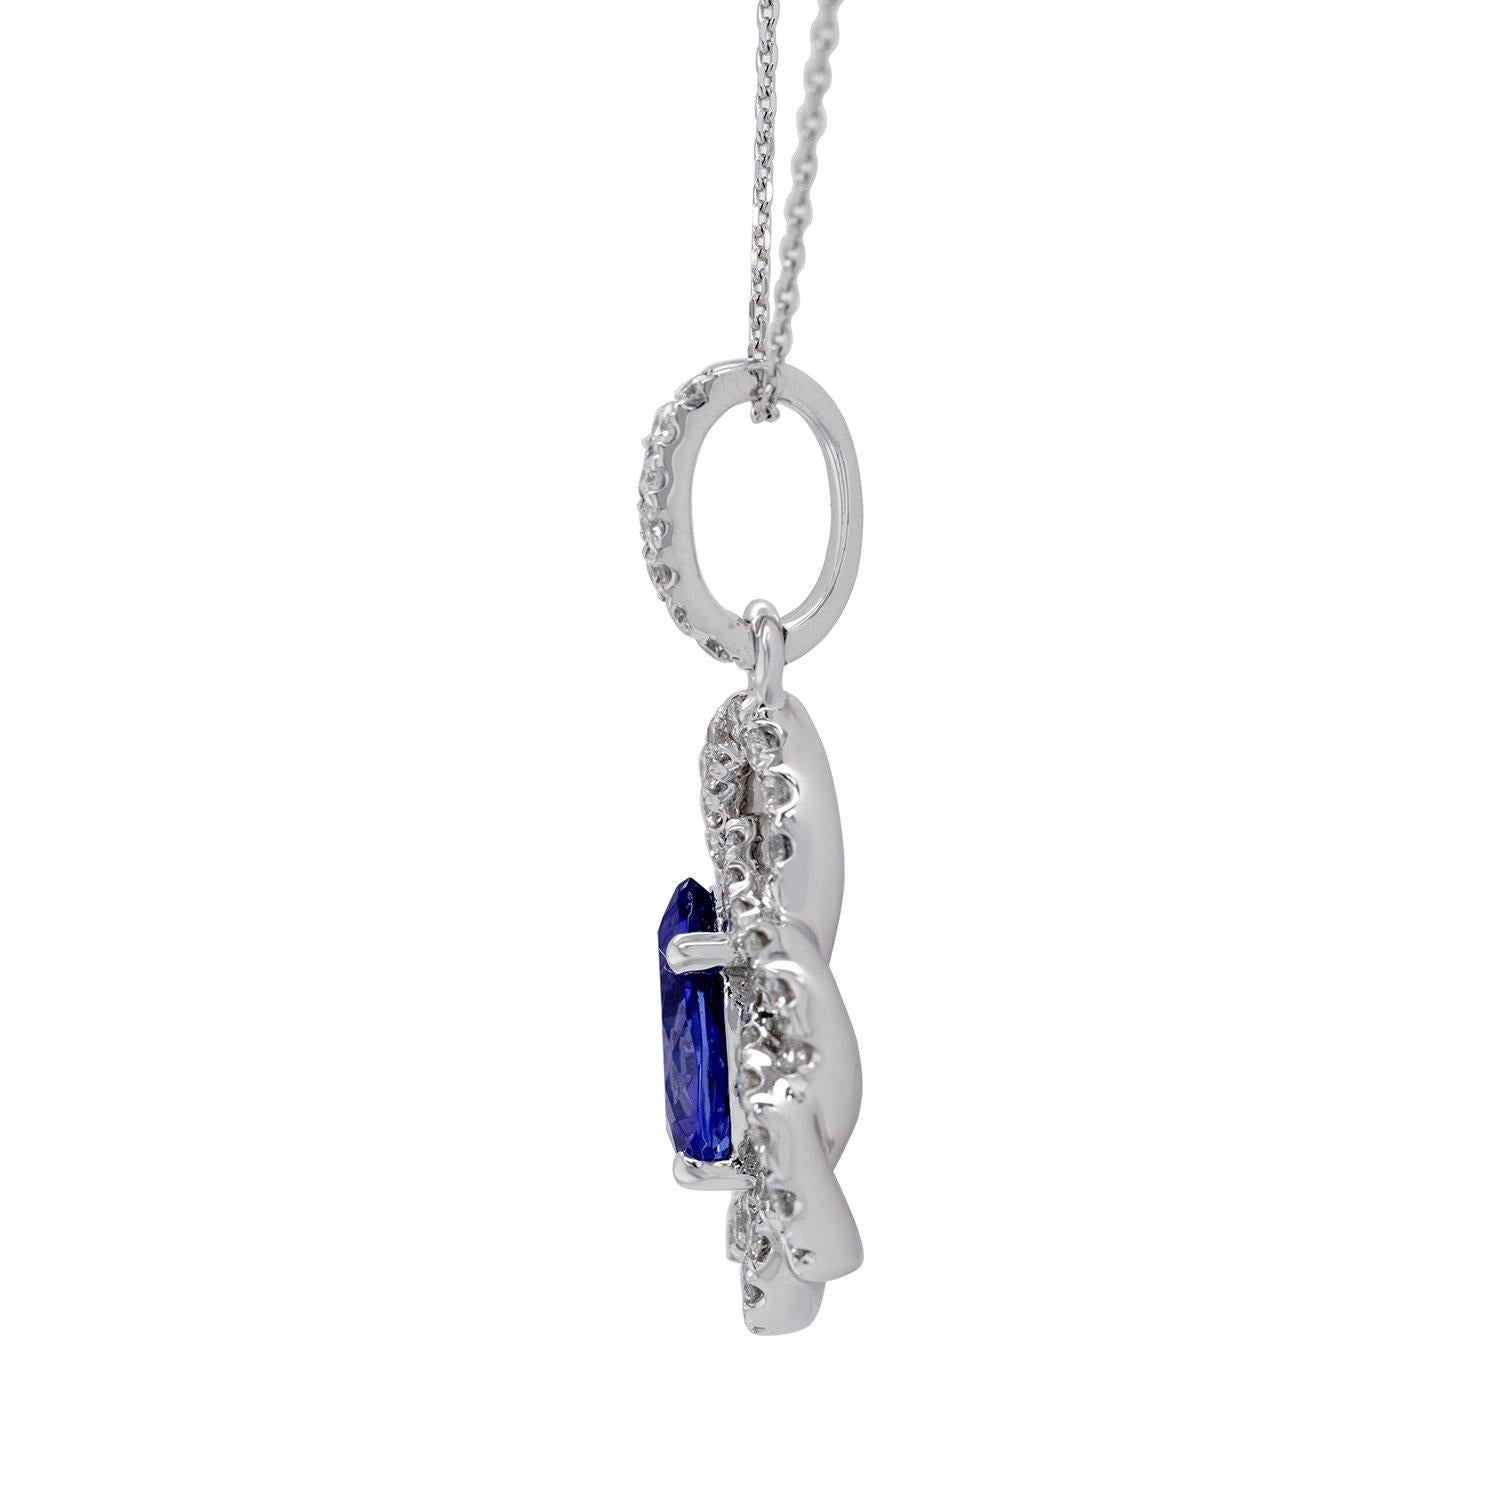 Introducing our stunning 0.99 carat tanzanite pendant, set in luxurious 14K white gold and adorned with two intertwining halos of shimmering diamonds. This exquisite piece of jewelry is the perfect combination of elegance and glamour.

The